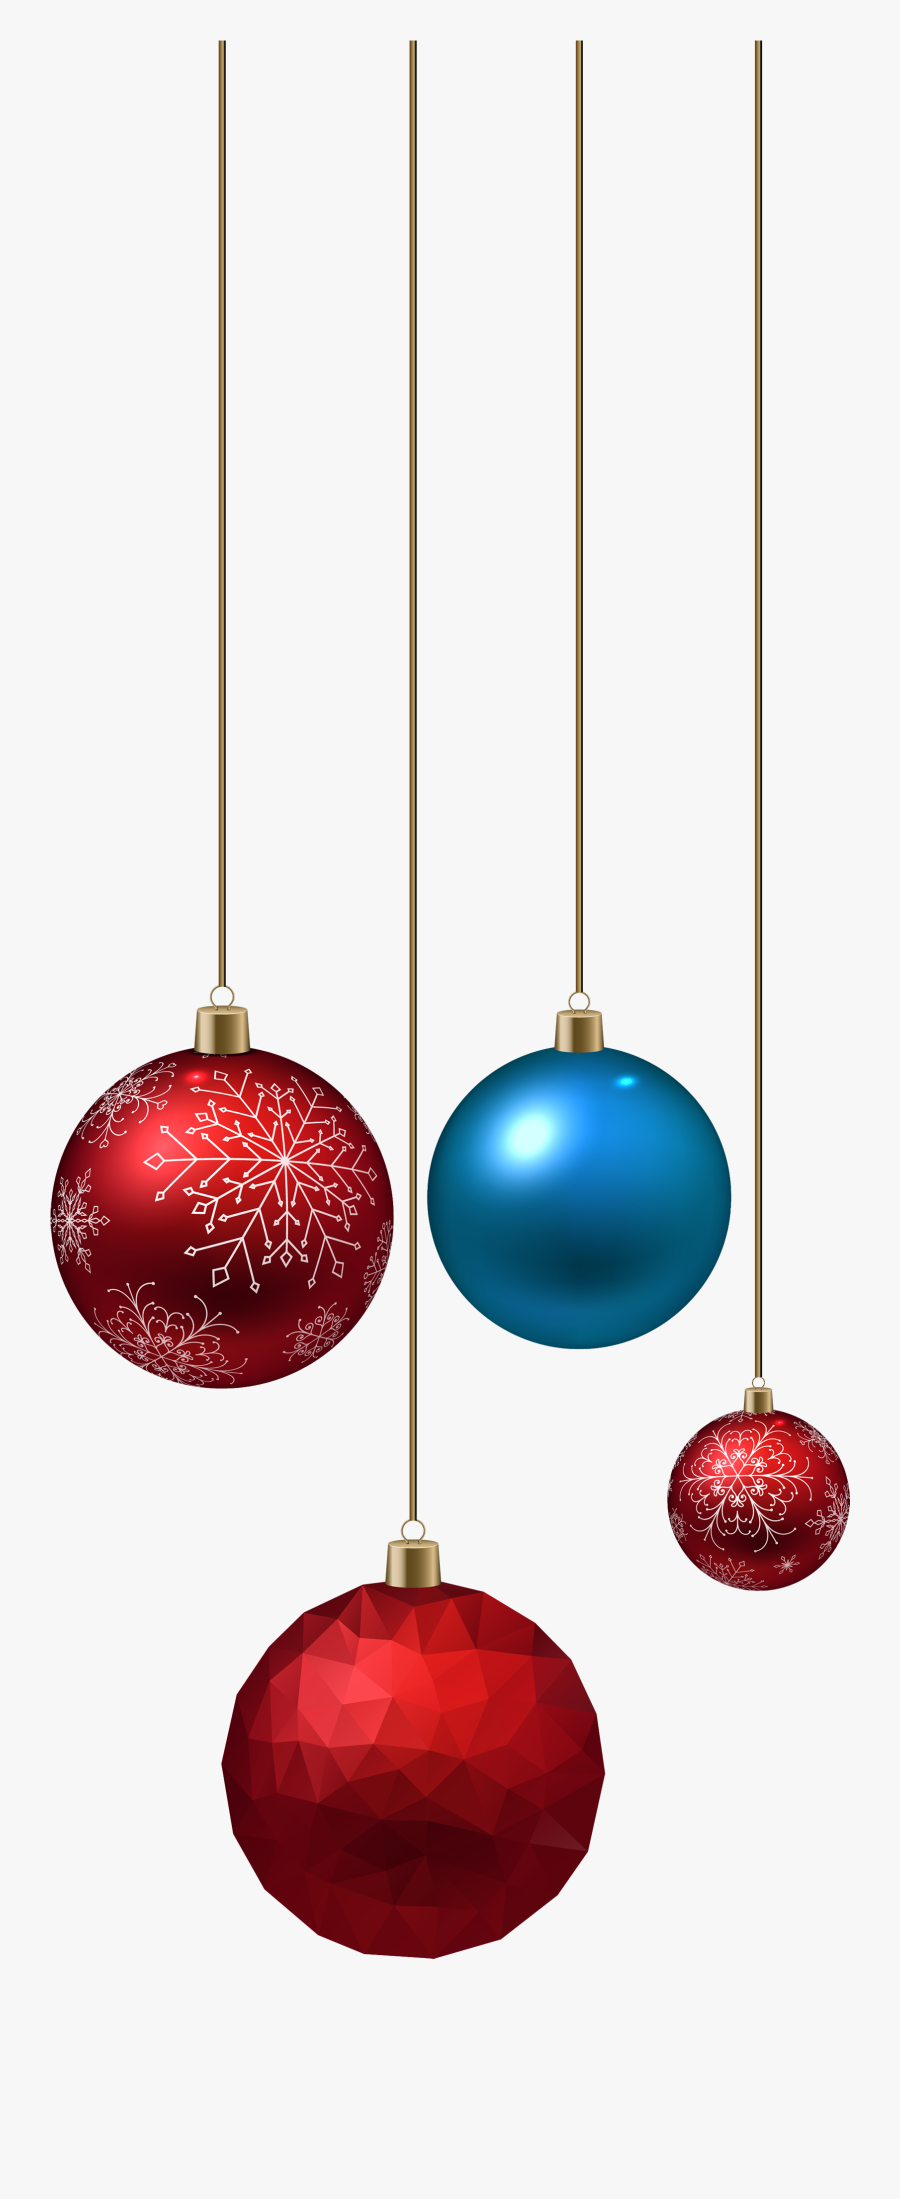 Blue And Red Christmas Ball Png Clipart - Christmas Balls Transparent Background, Transparent Clipart